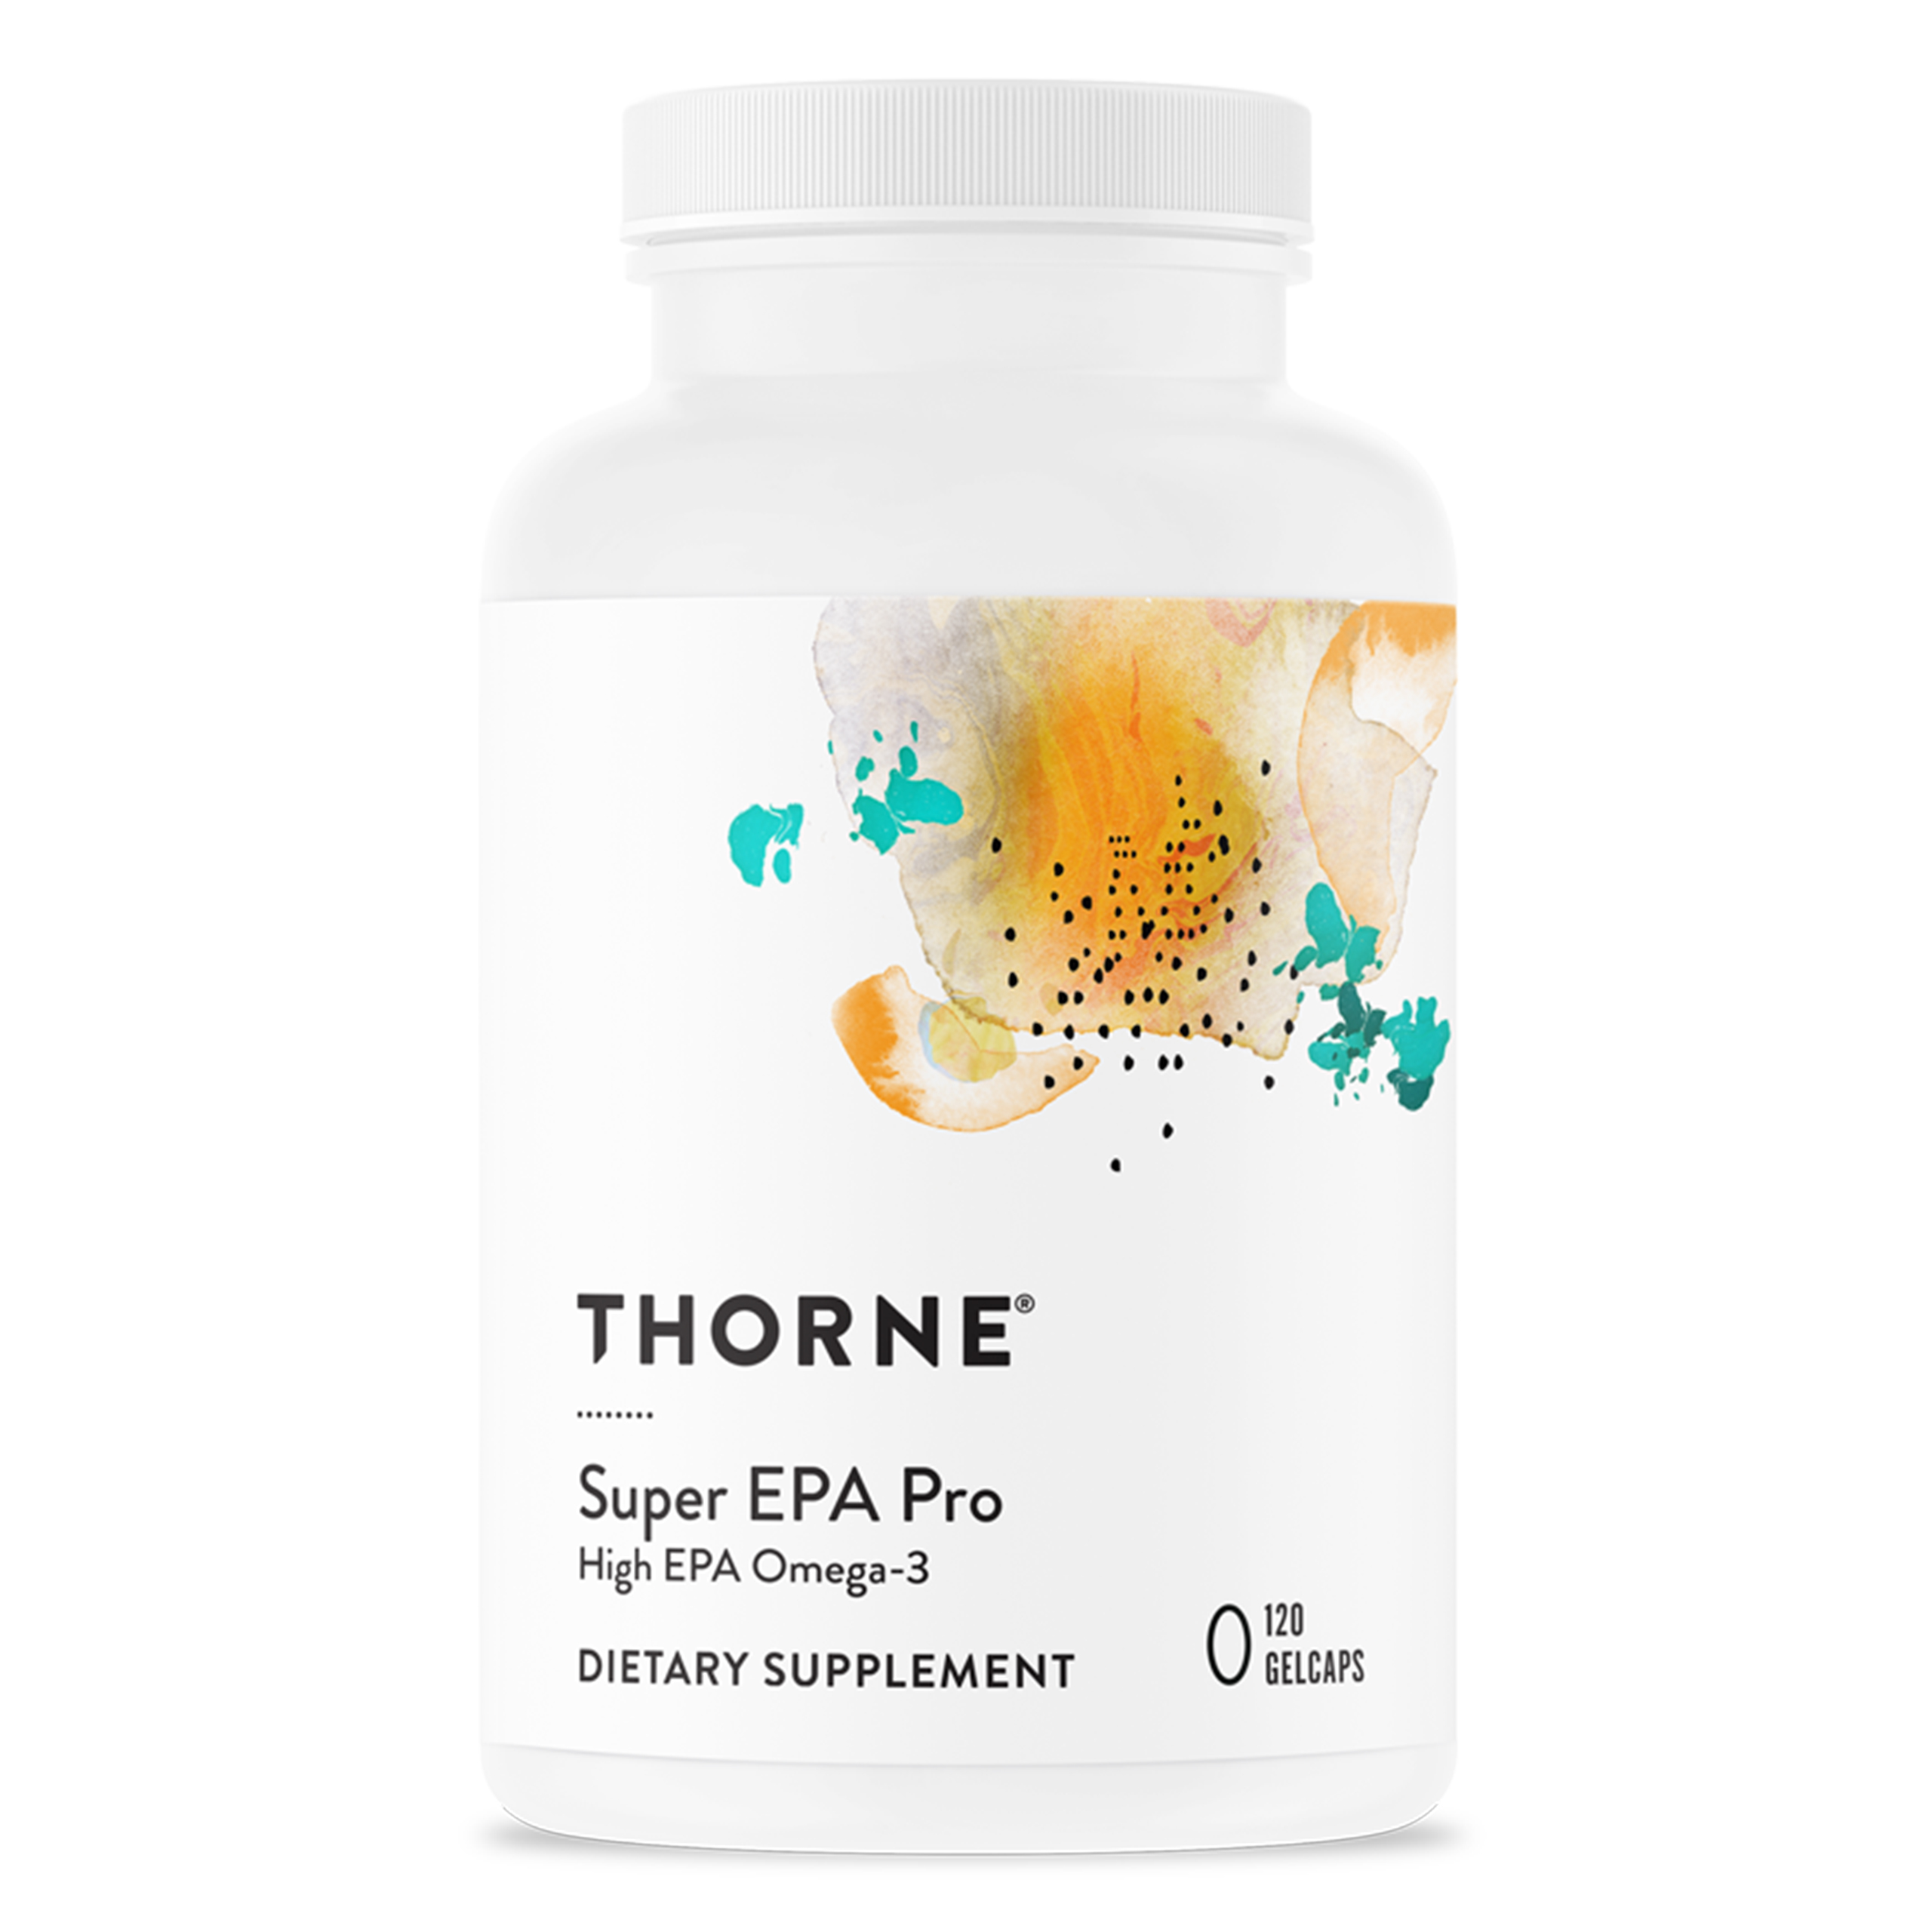 Thorne Super EPA Pro, Omega-3 Fish Oil with High Concentration EPA, Promotes Heart Health and Blood Lipid Support, 120 Gelcaps - image 1 of 7